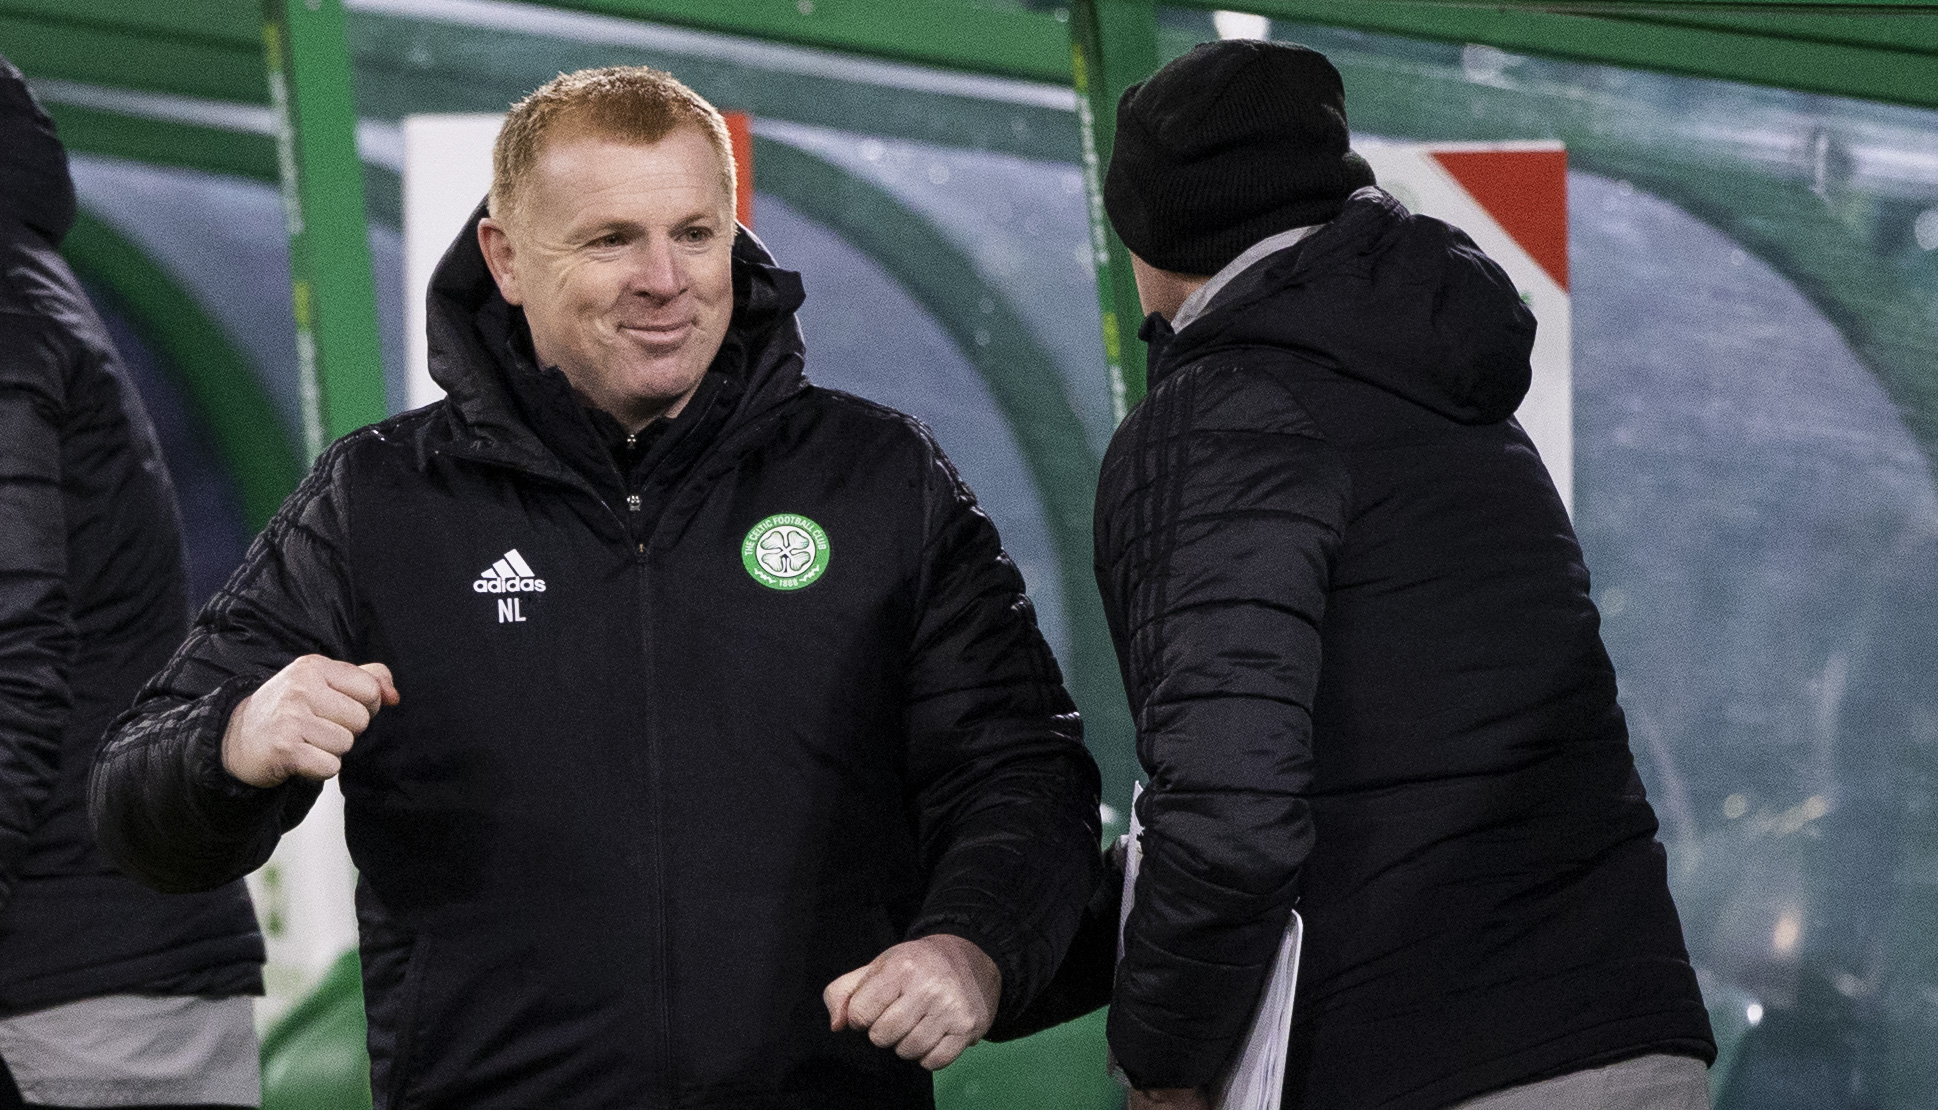 One media man is already in full on rage at Celtic mode ahead of derby